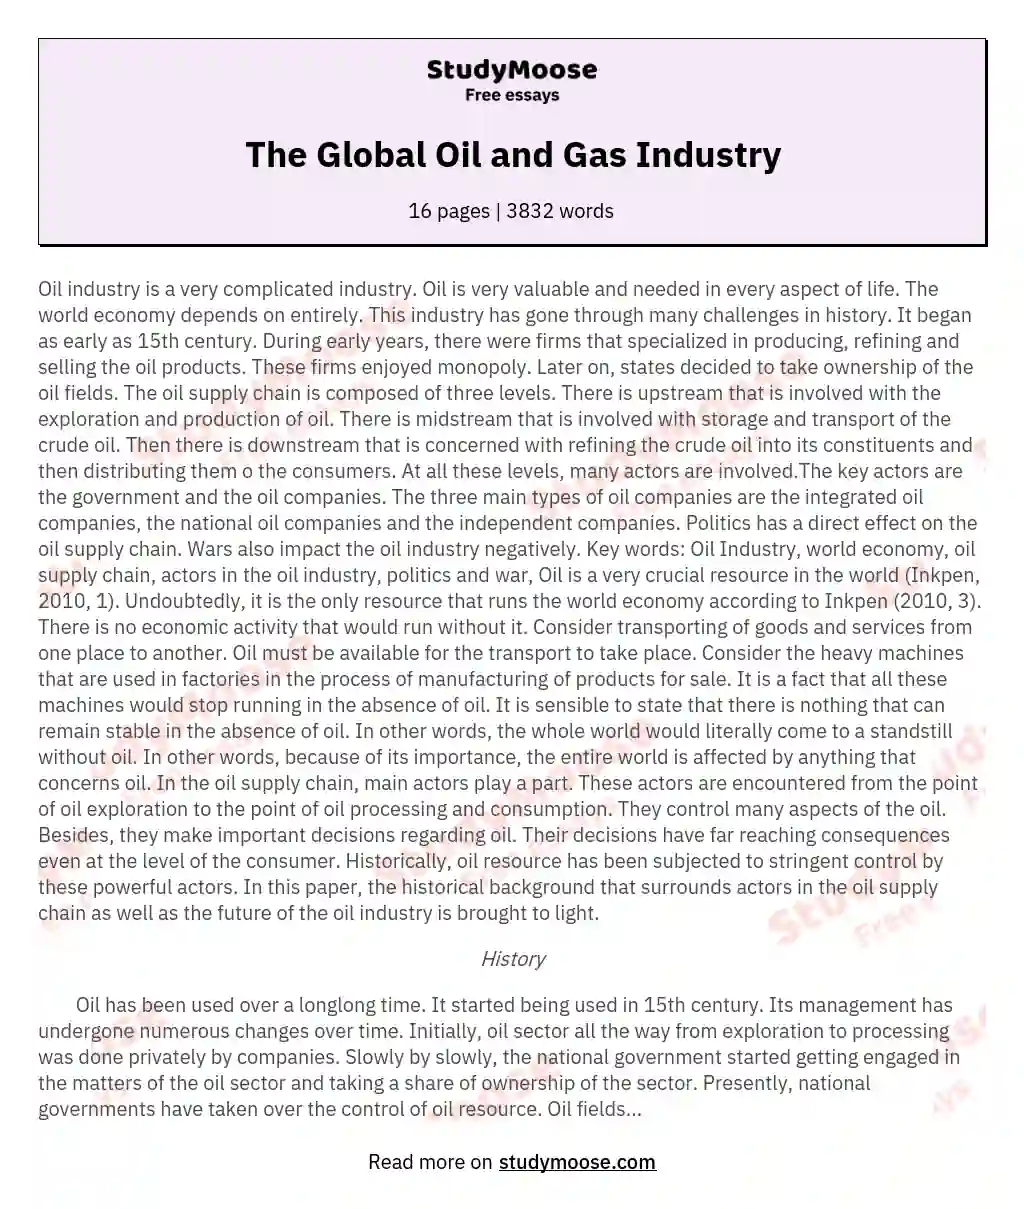 The Global Oil and Gas Industry essay